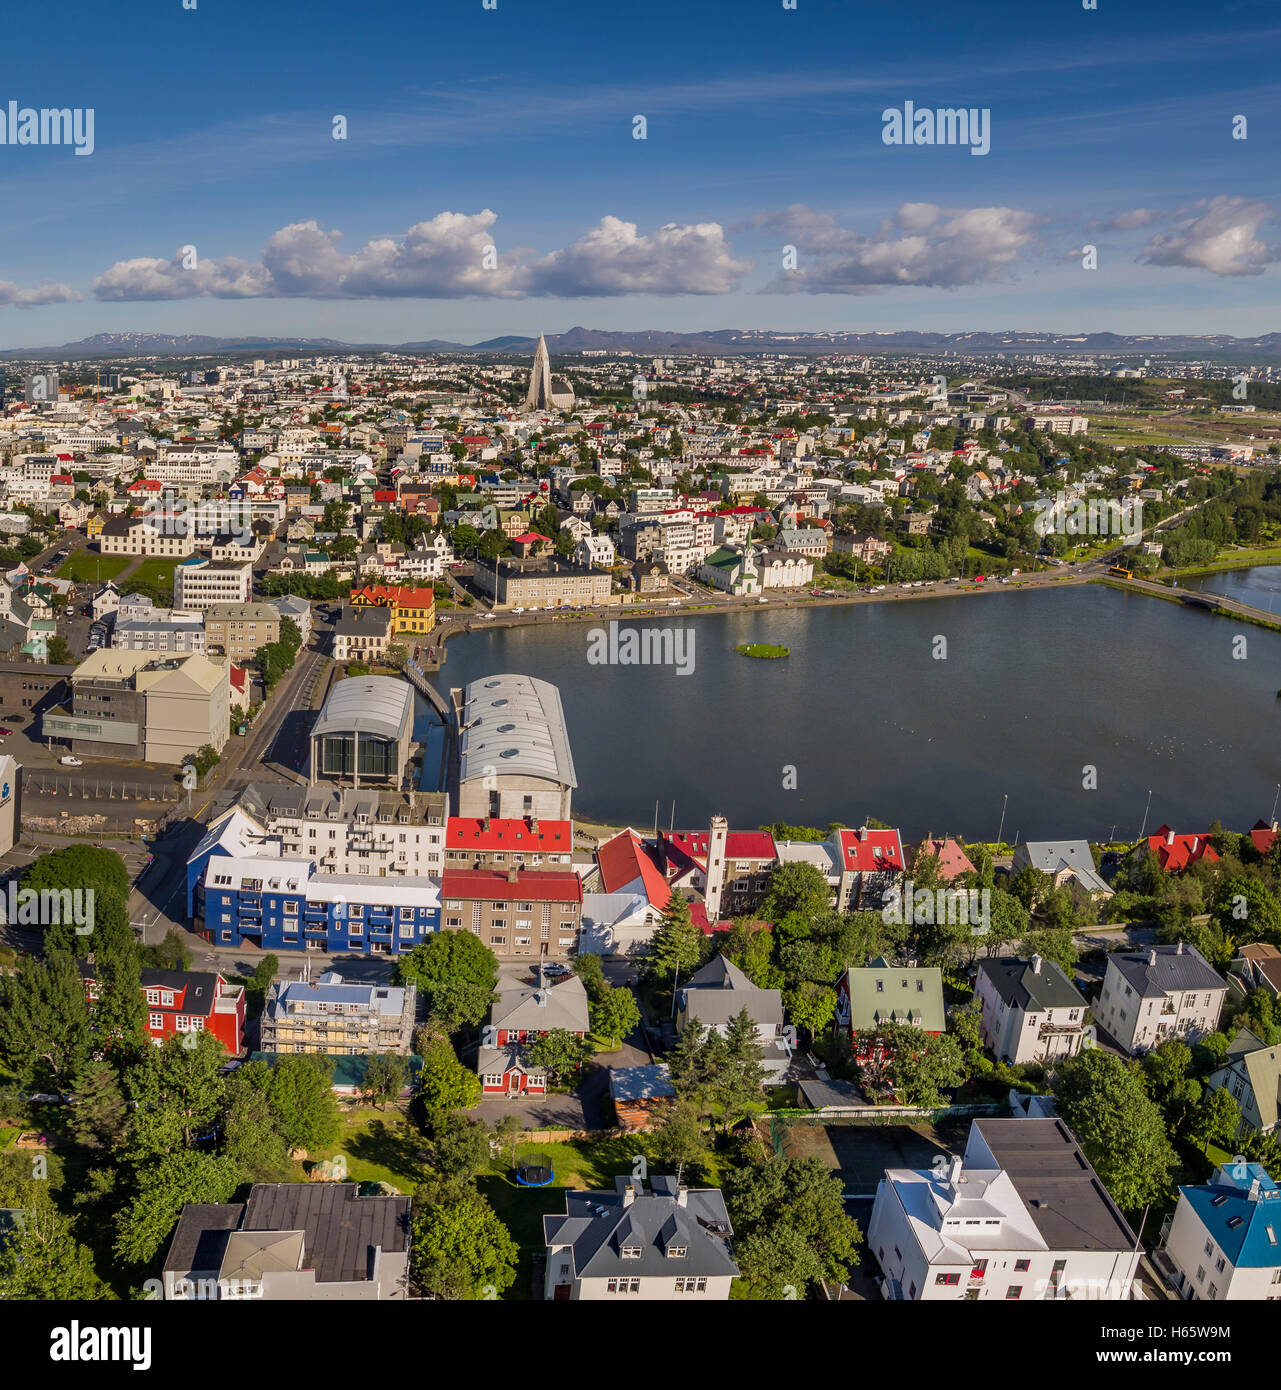 Aerial view of Reykjavik, Iceland. This image is shot using a drone. Stock Photo